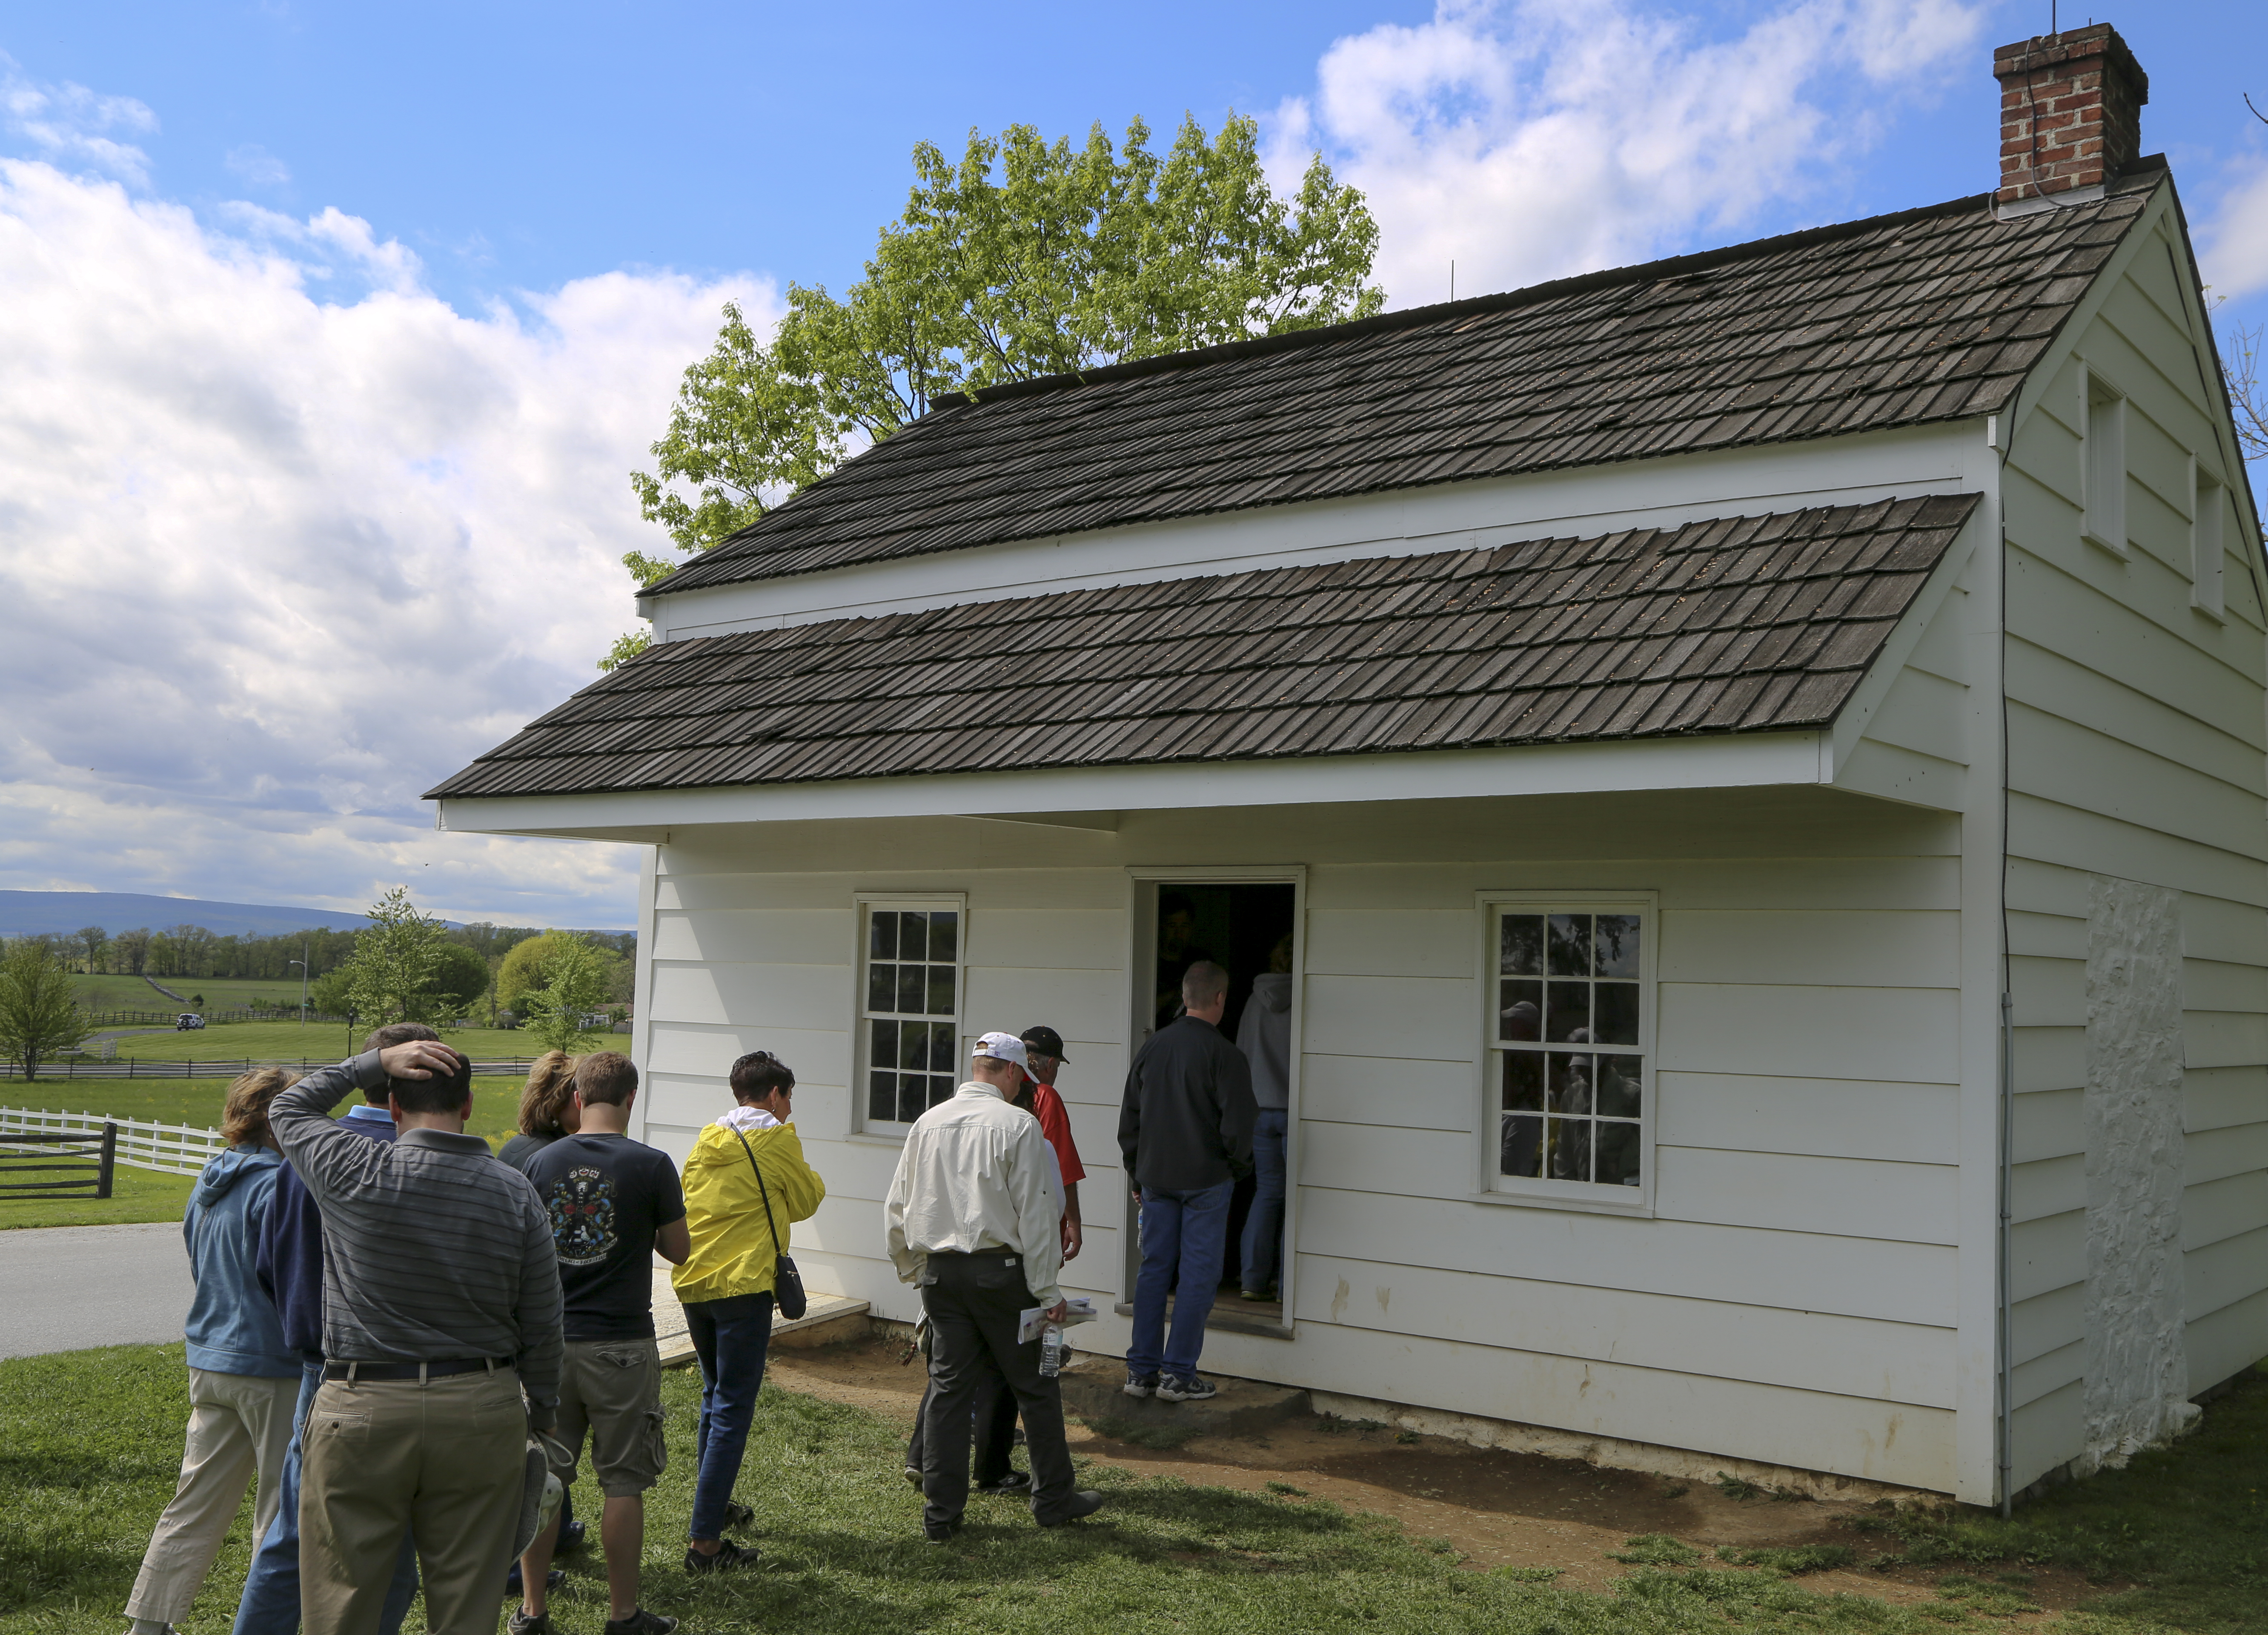 A group of visitors wait in line to get inside a small white sided historic house. The doorway into the house is in the middle and small windows flank the door on both sides. There is a red brick chimney on the upper right of the roof.